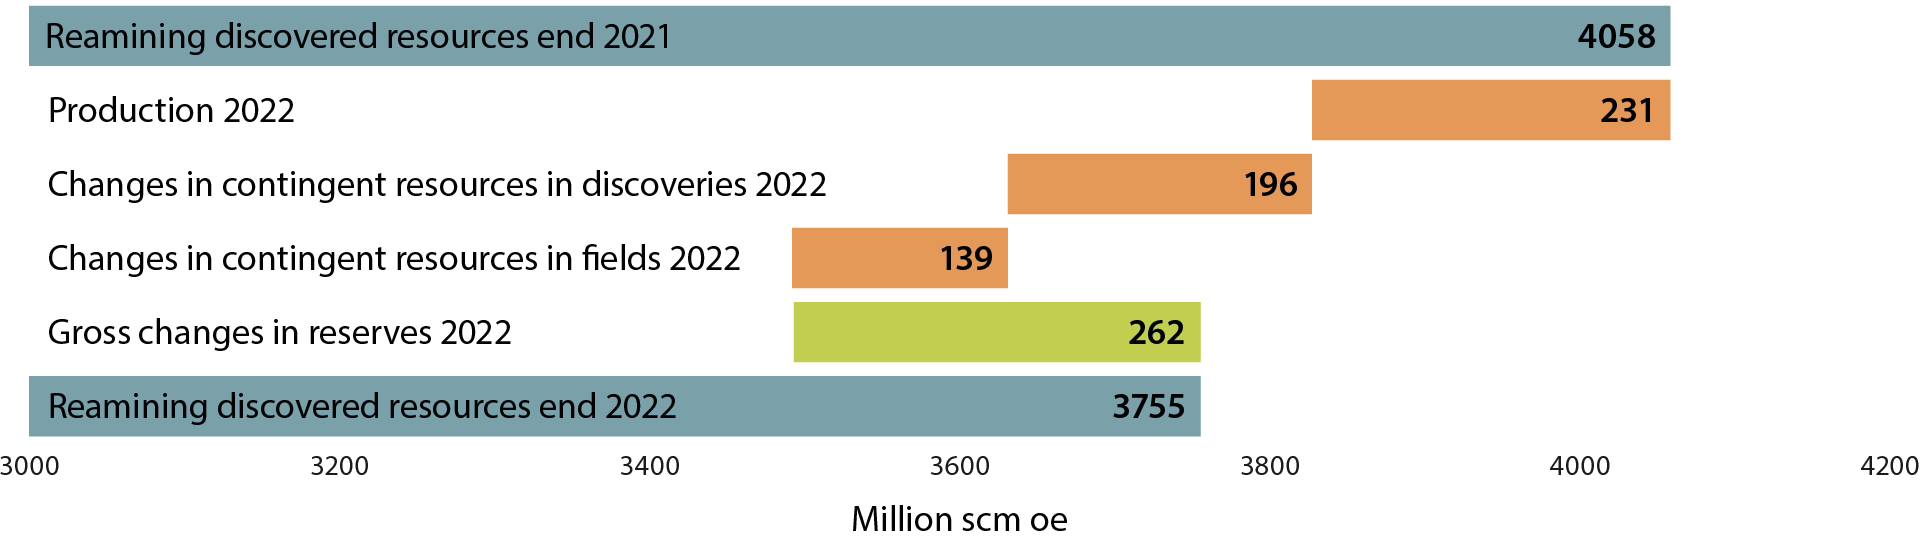 the figure shows an overview of the change in discovered resources from 2021 to 2022